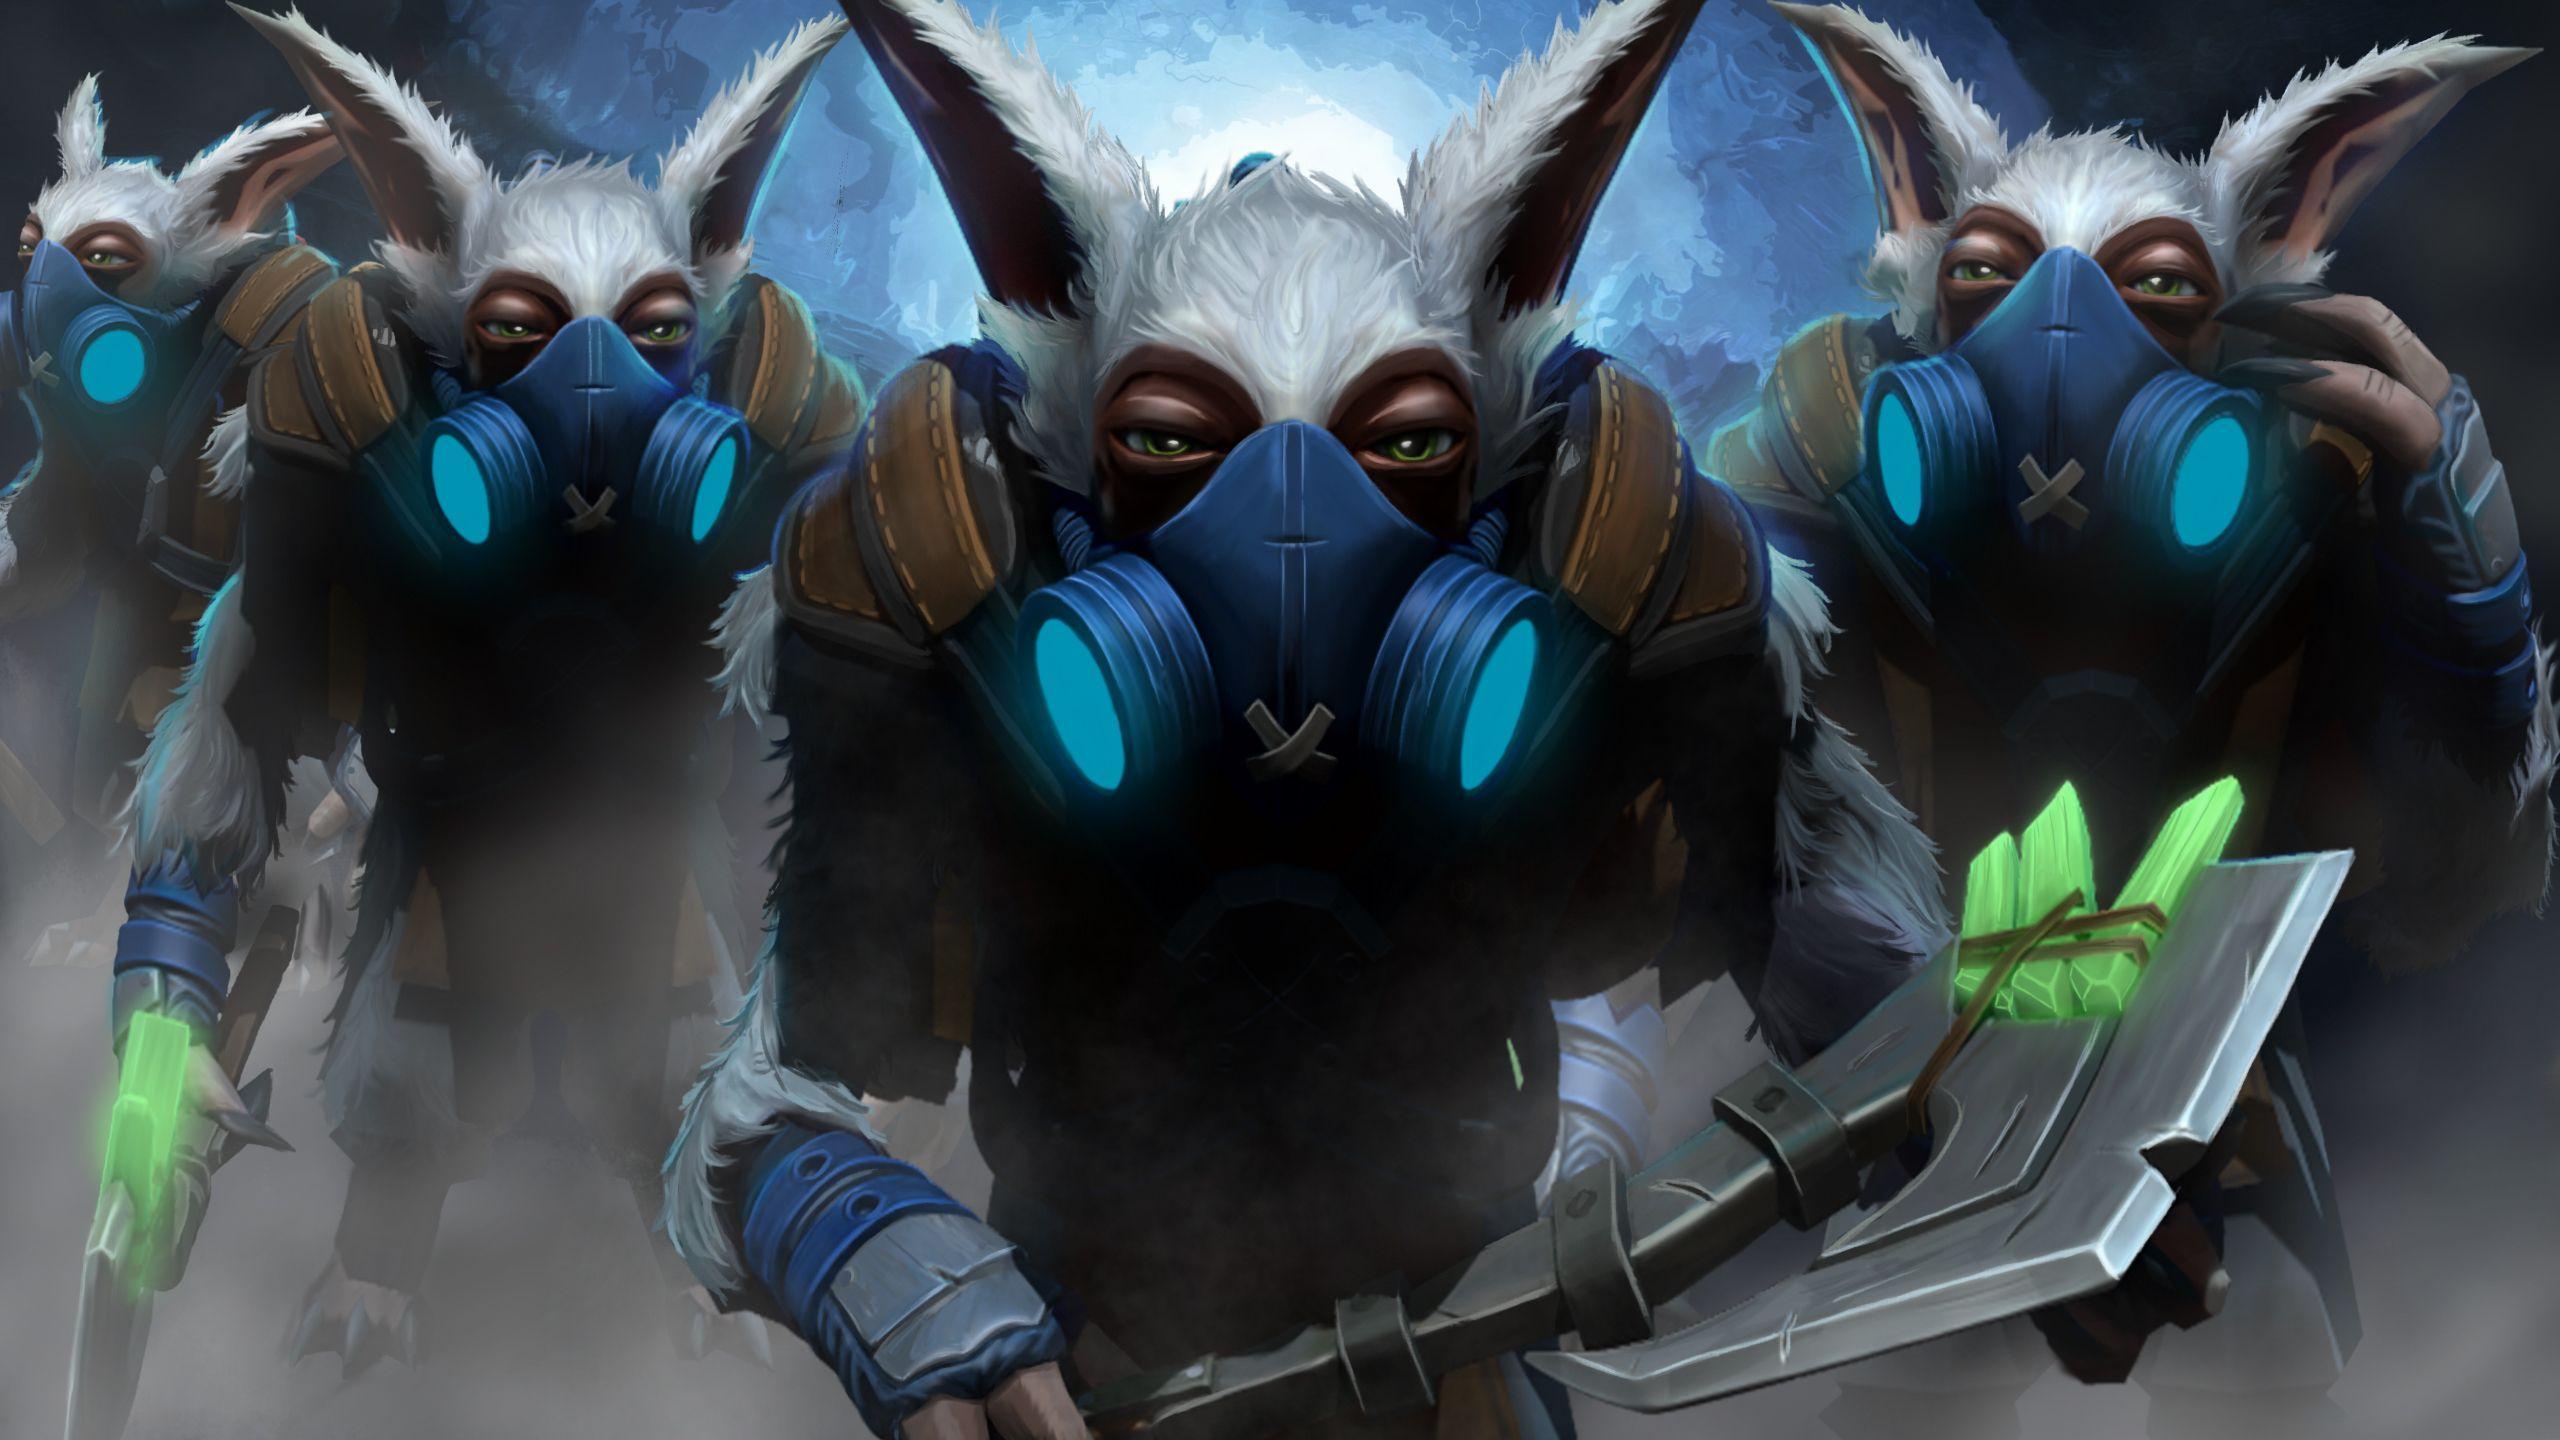 Meepo: The Cavern Infiltrator Wallpaper, more